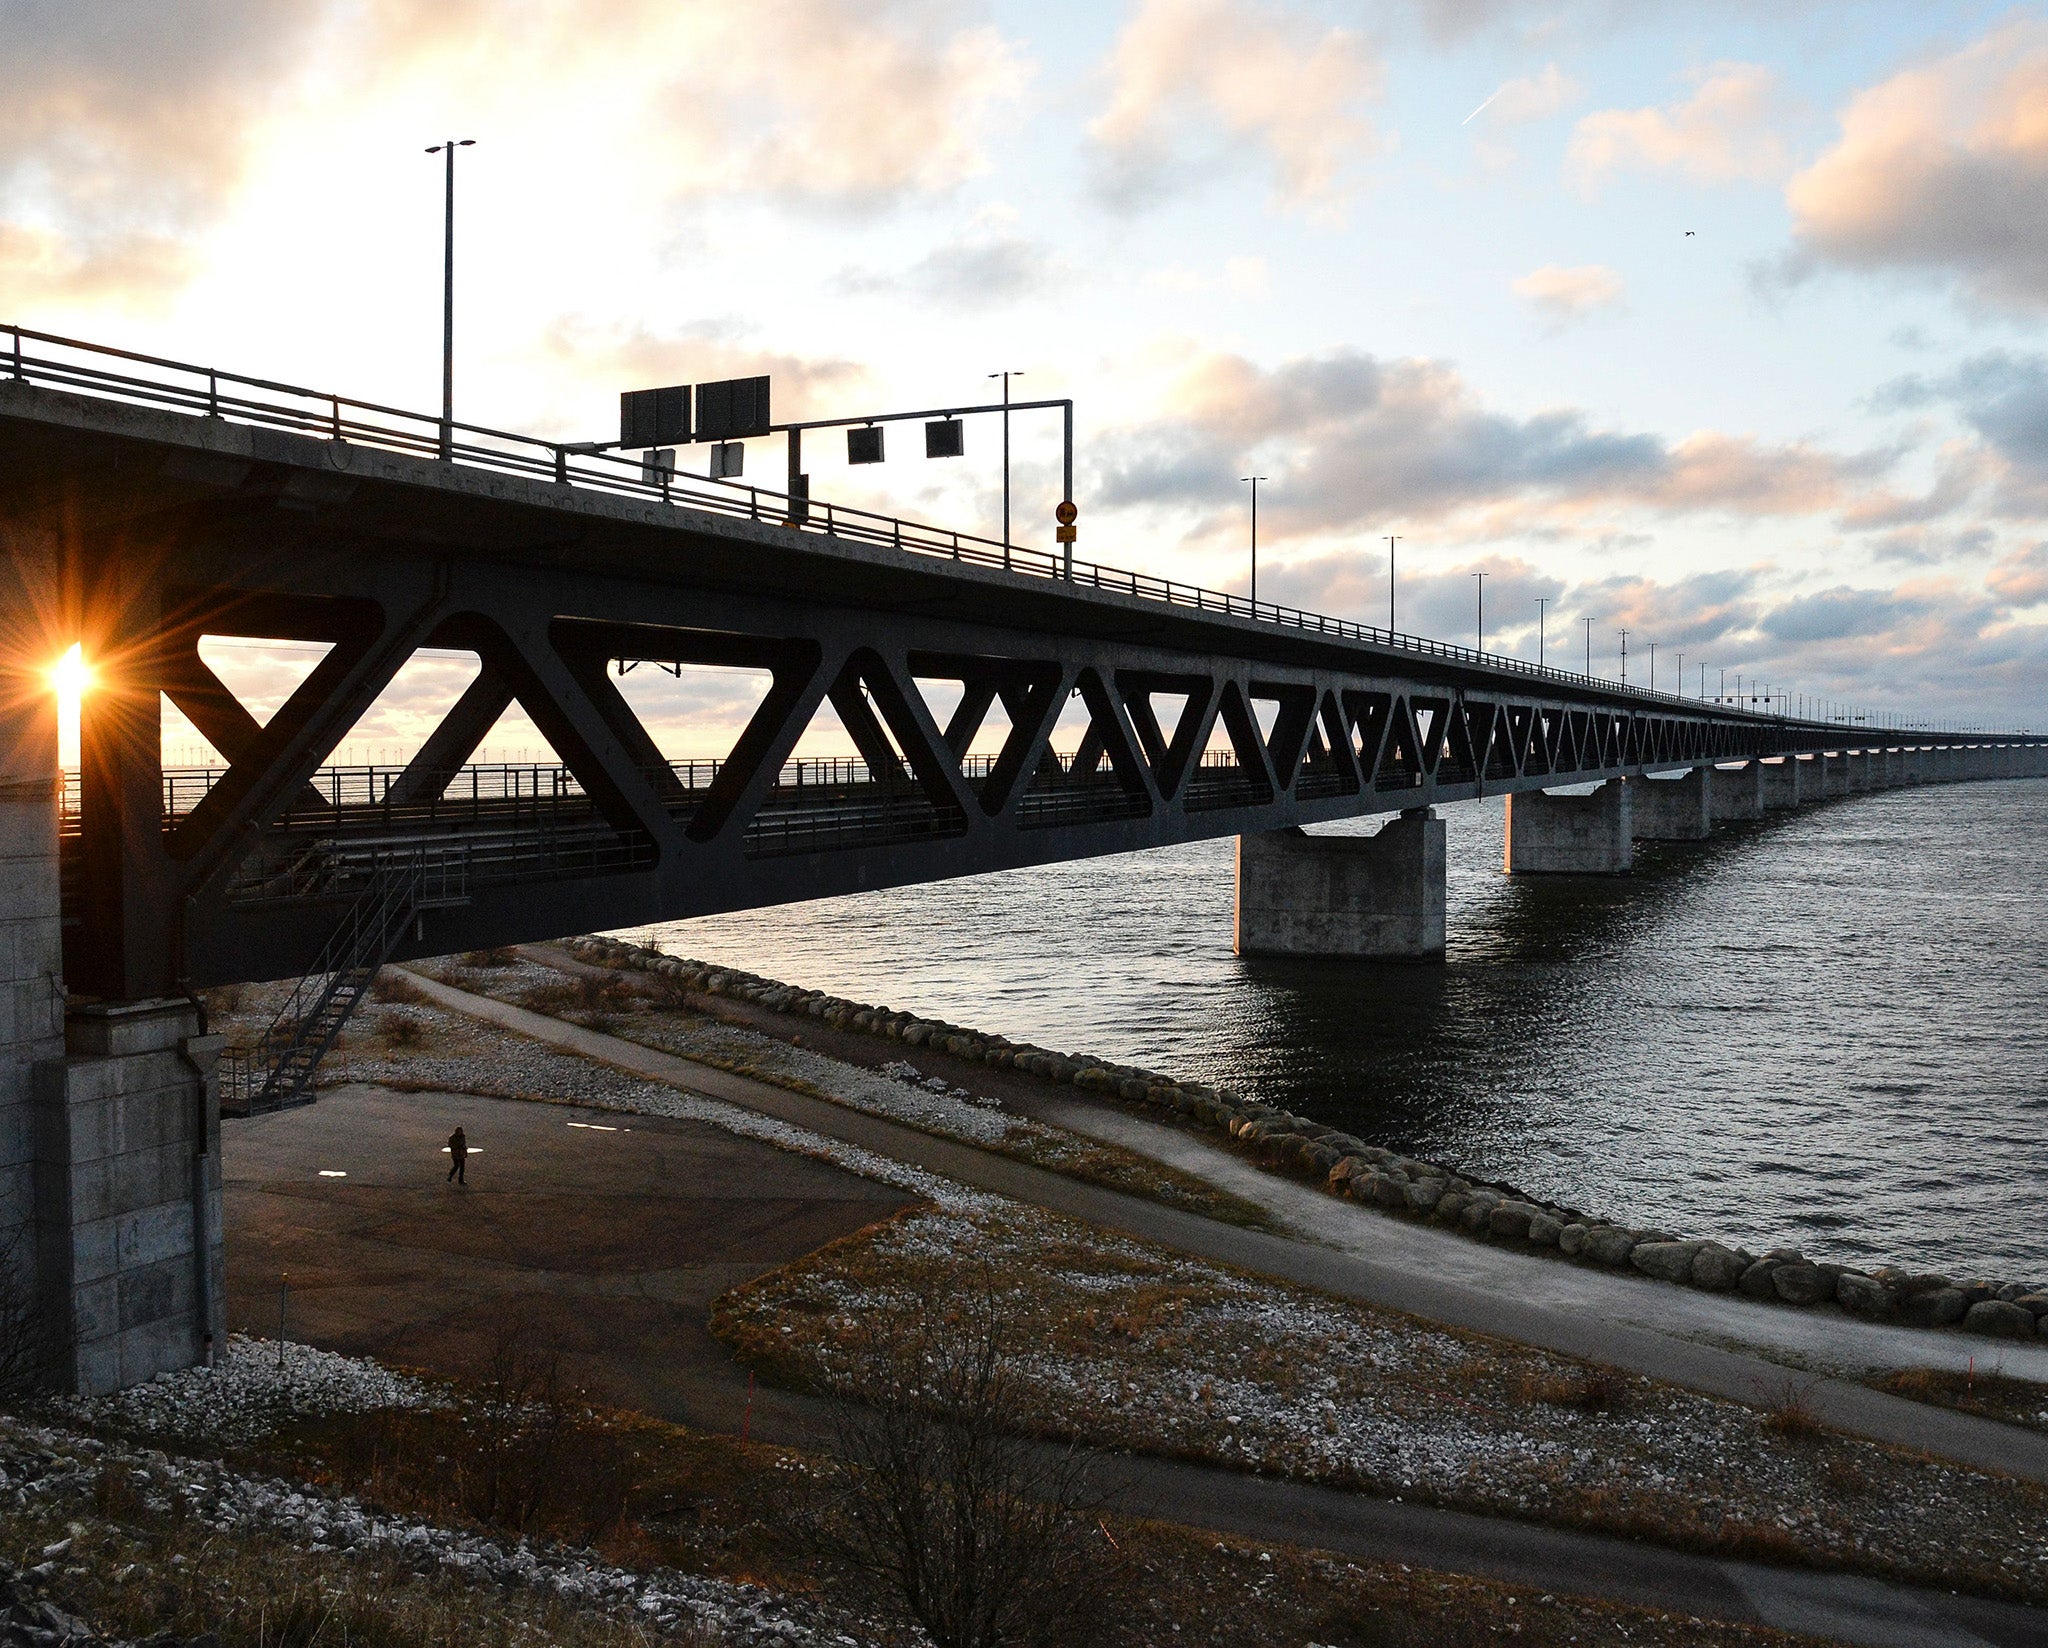 Refugee crisis Sweden imposes border controls on bridge connecting Malmo and Copenhagen in Denmark to restrict migrants